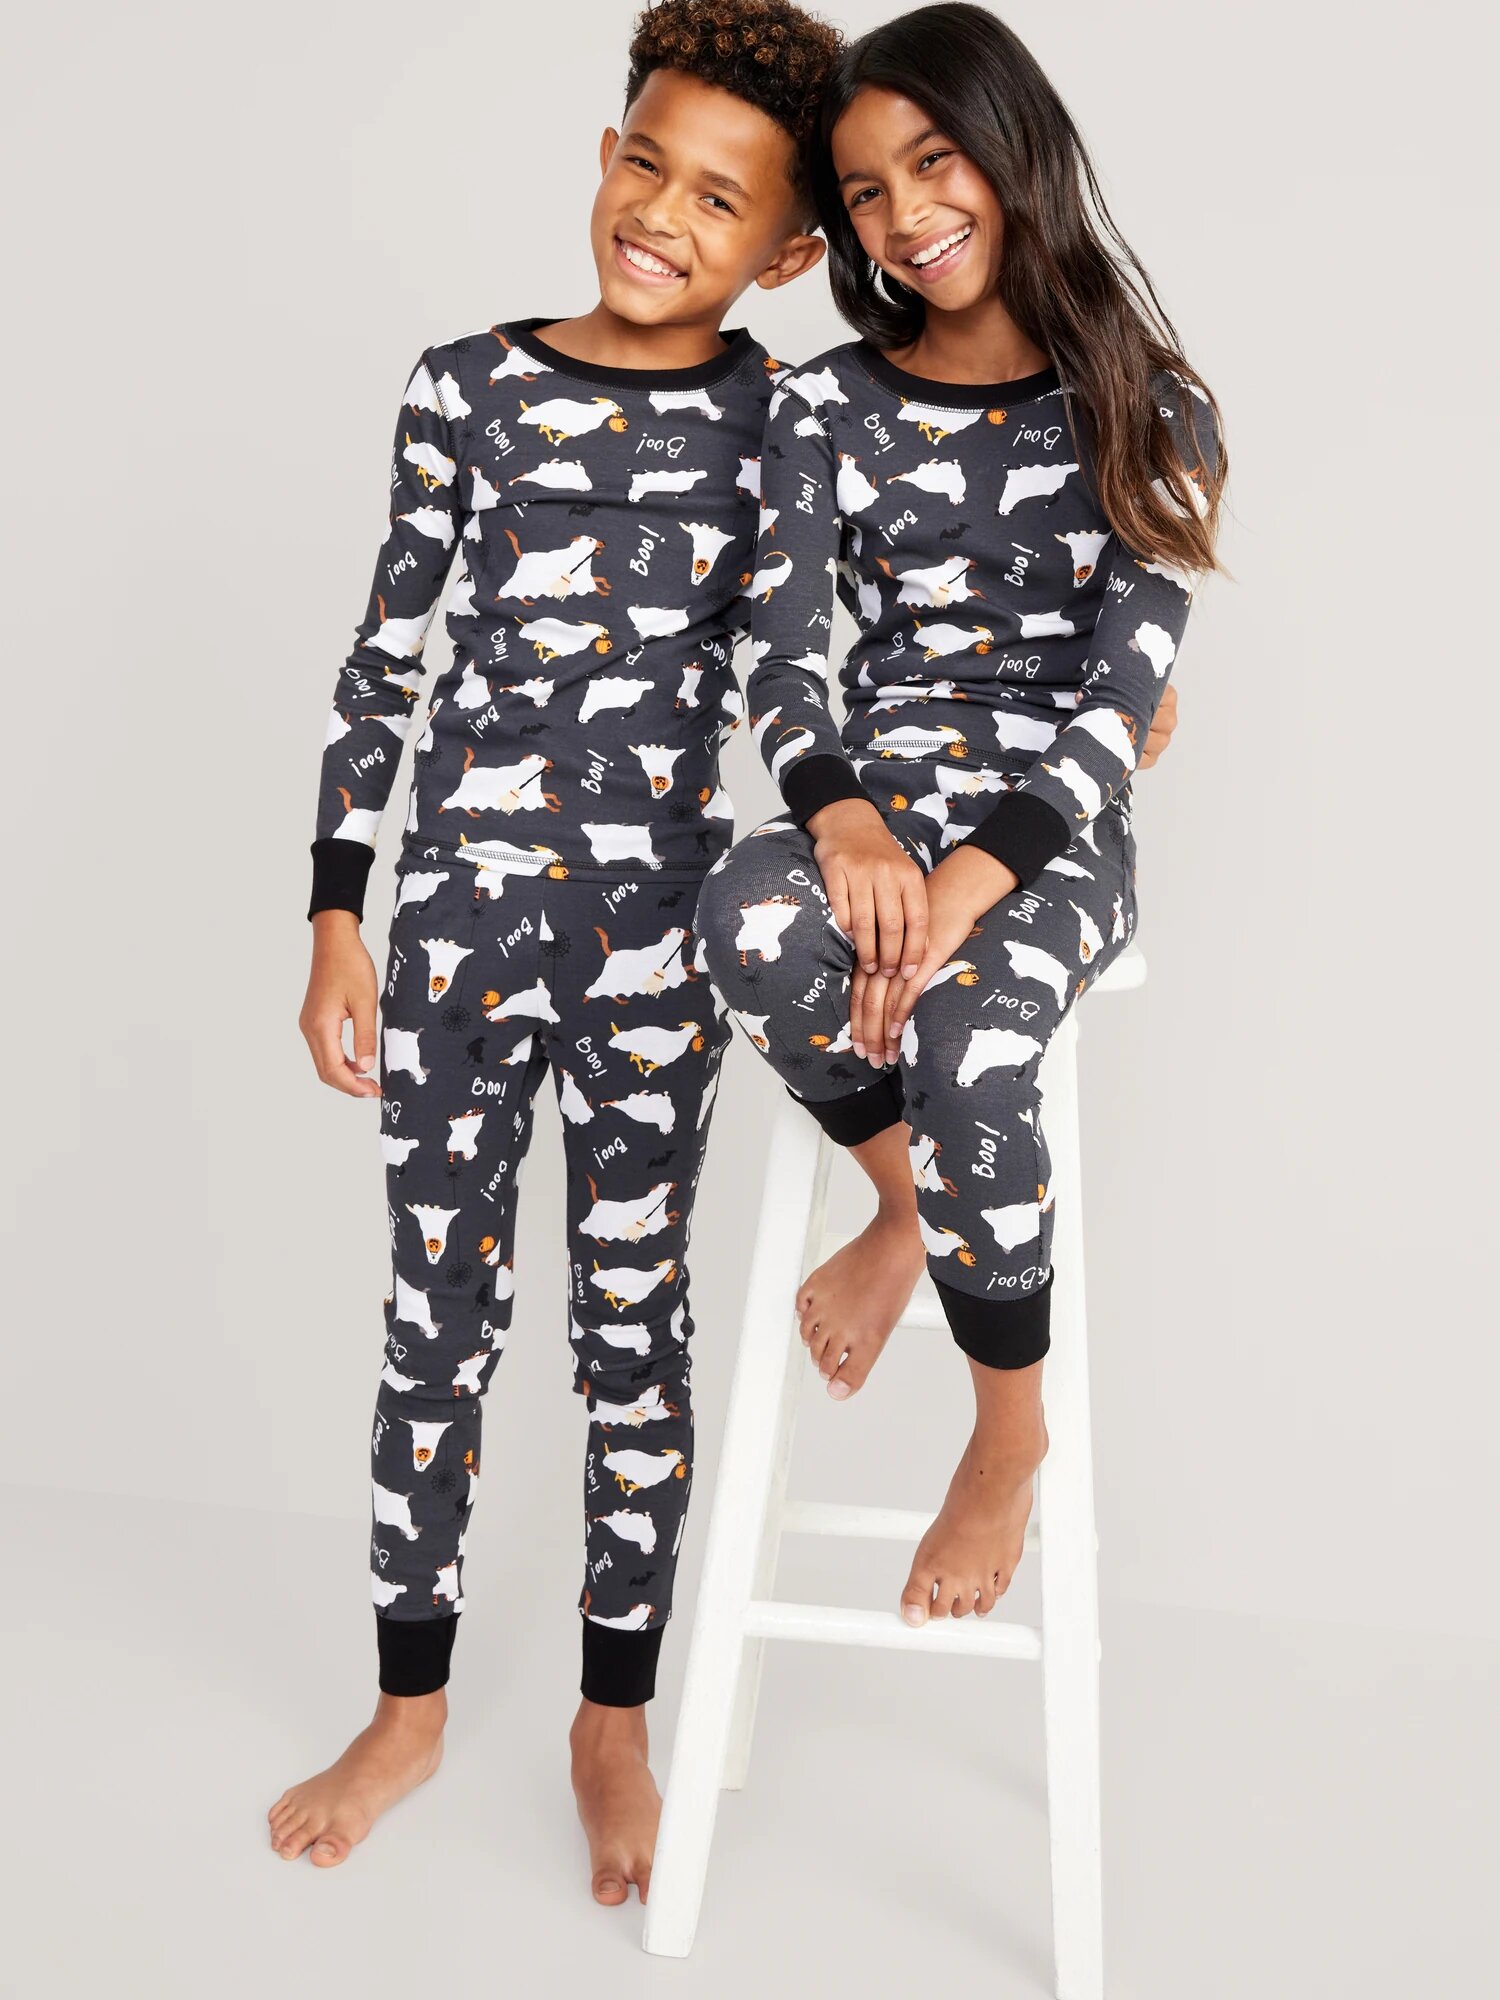 Old Navy Fur Boo-Boo's Matching Gender-Neutral Printed Snug-Fit Pajama Set for Kids